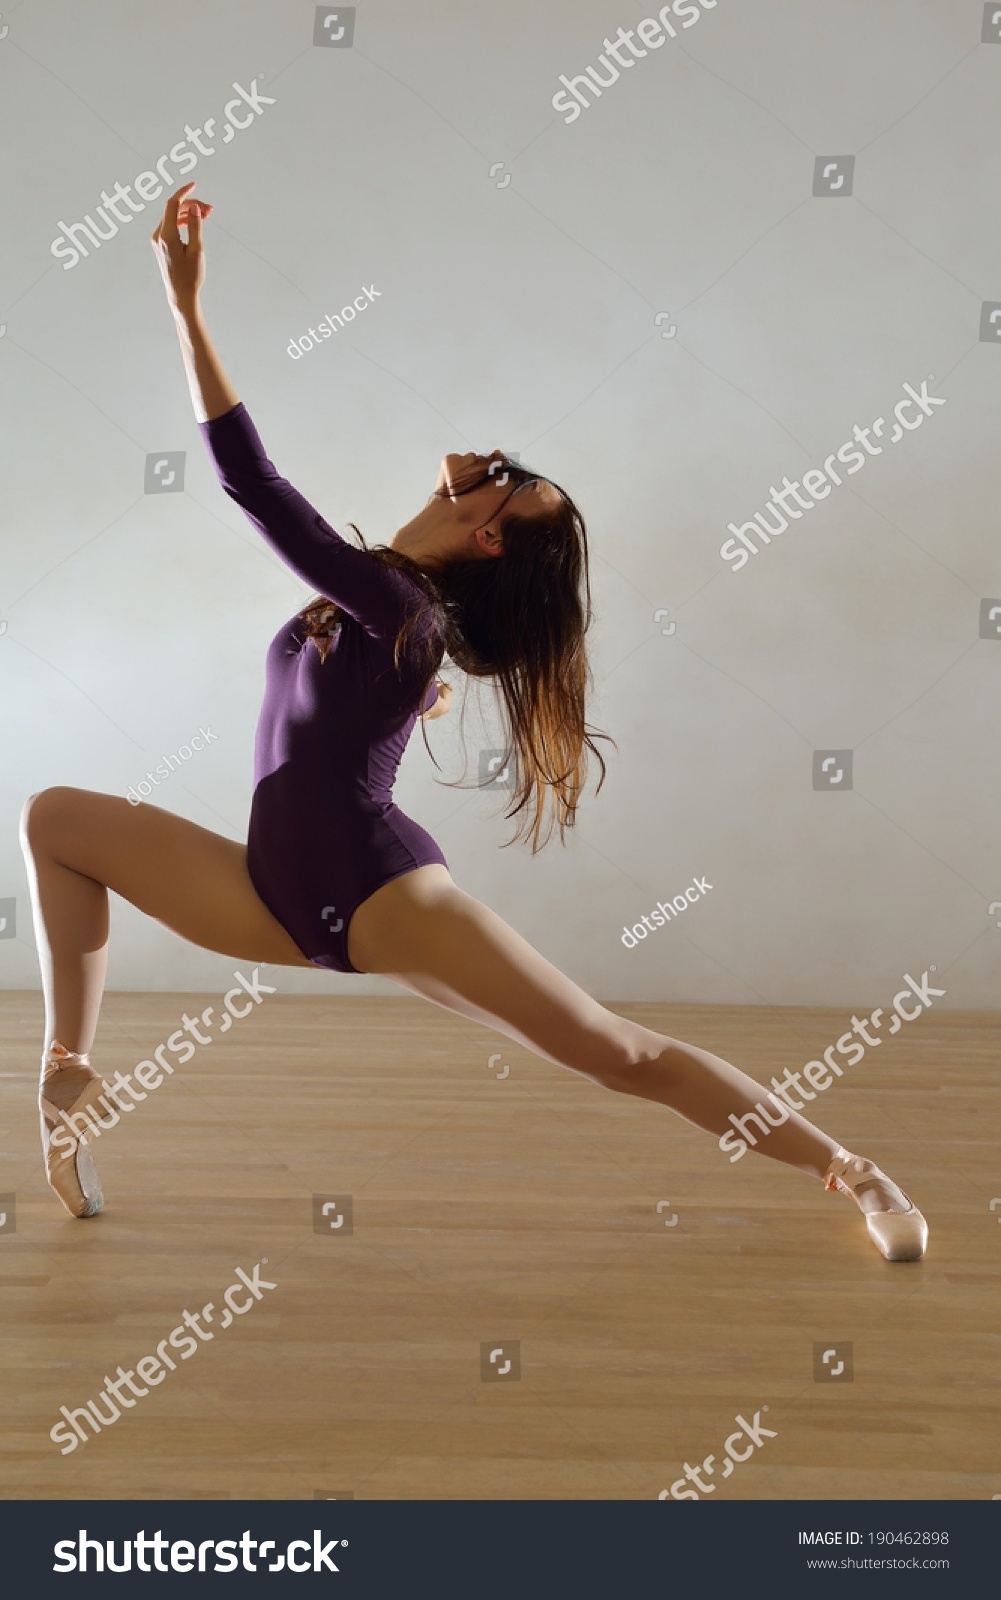 modern style ballet dancer posing and jumping on training #190462898